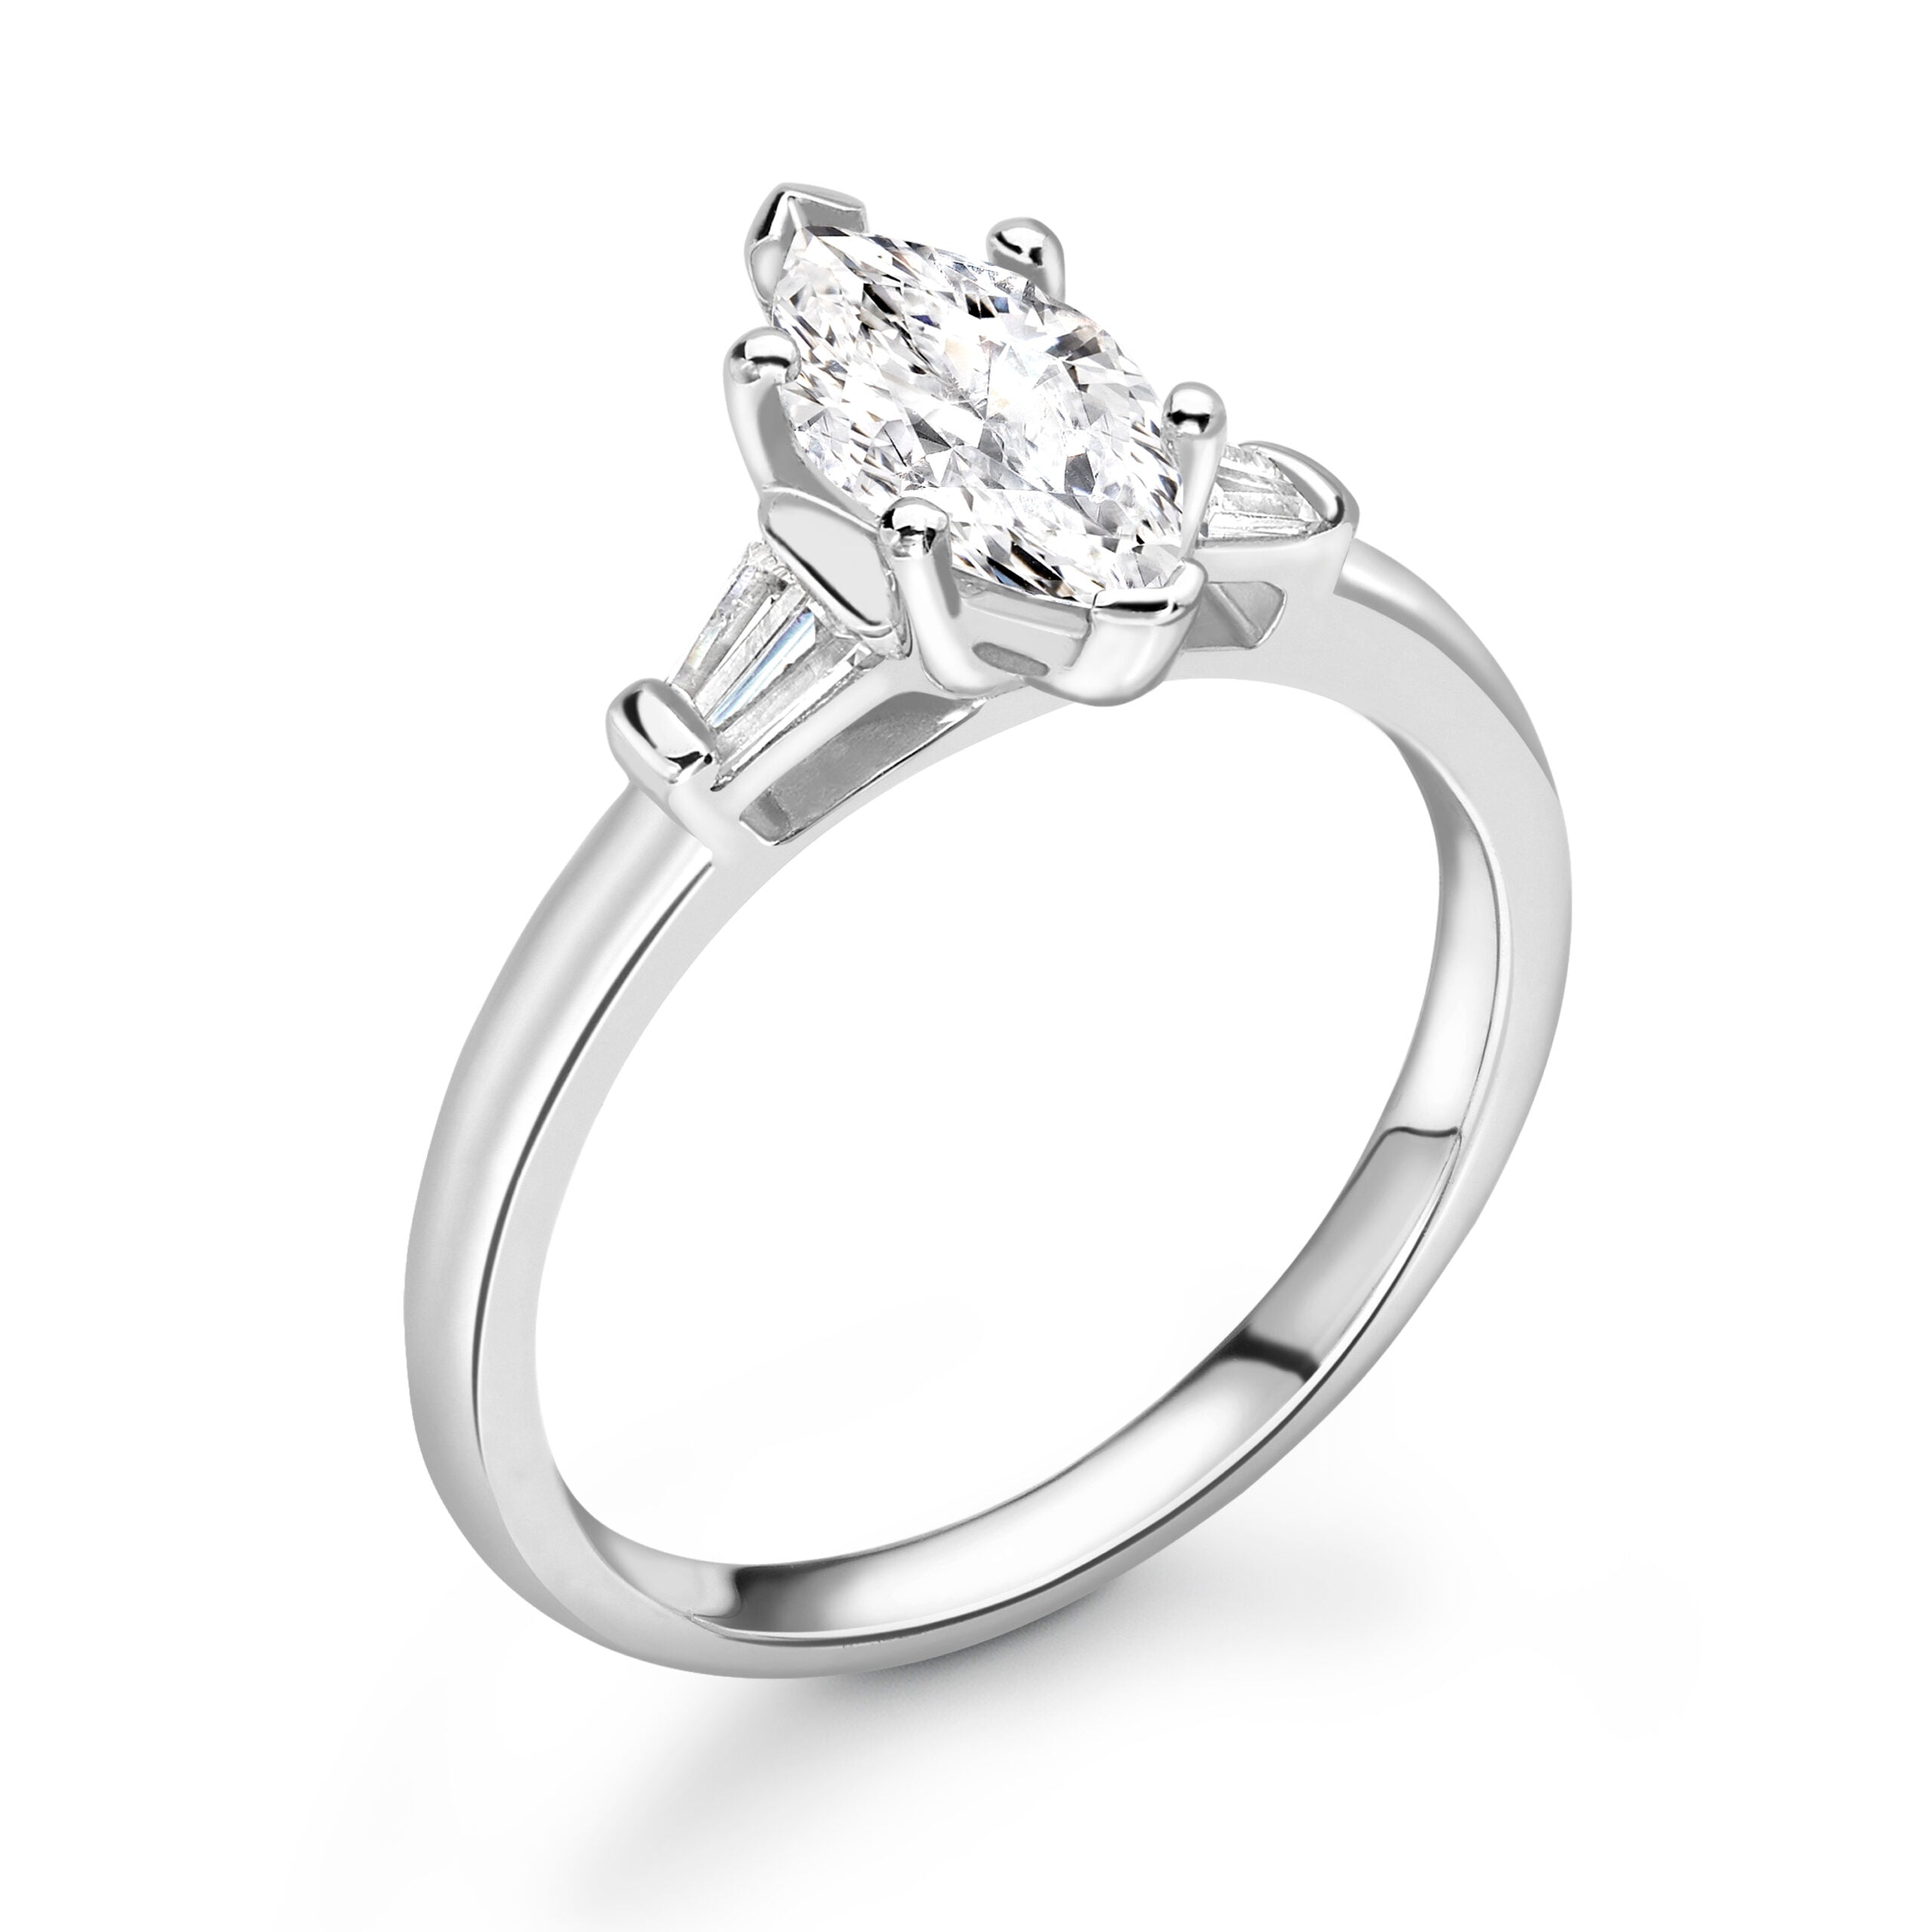 Marquise Trilogy Diamond ring in White Gold